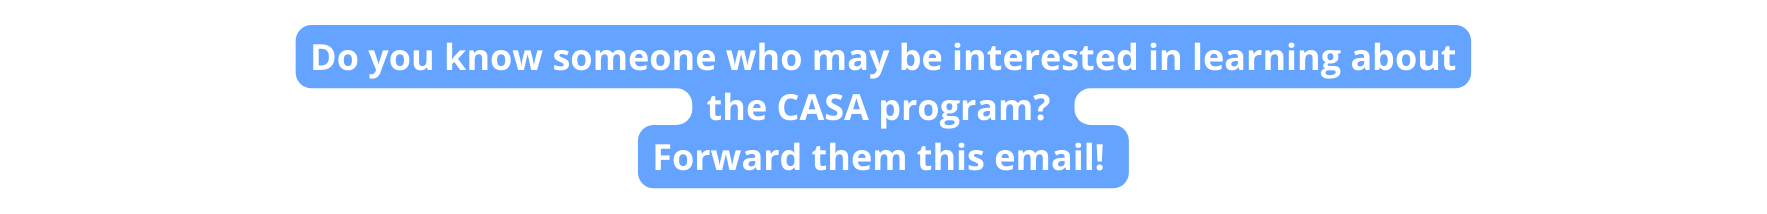 Do you know someone who may be interested in learning about the CASA program Forward them this email